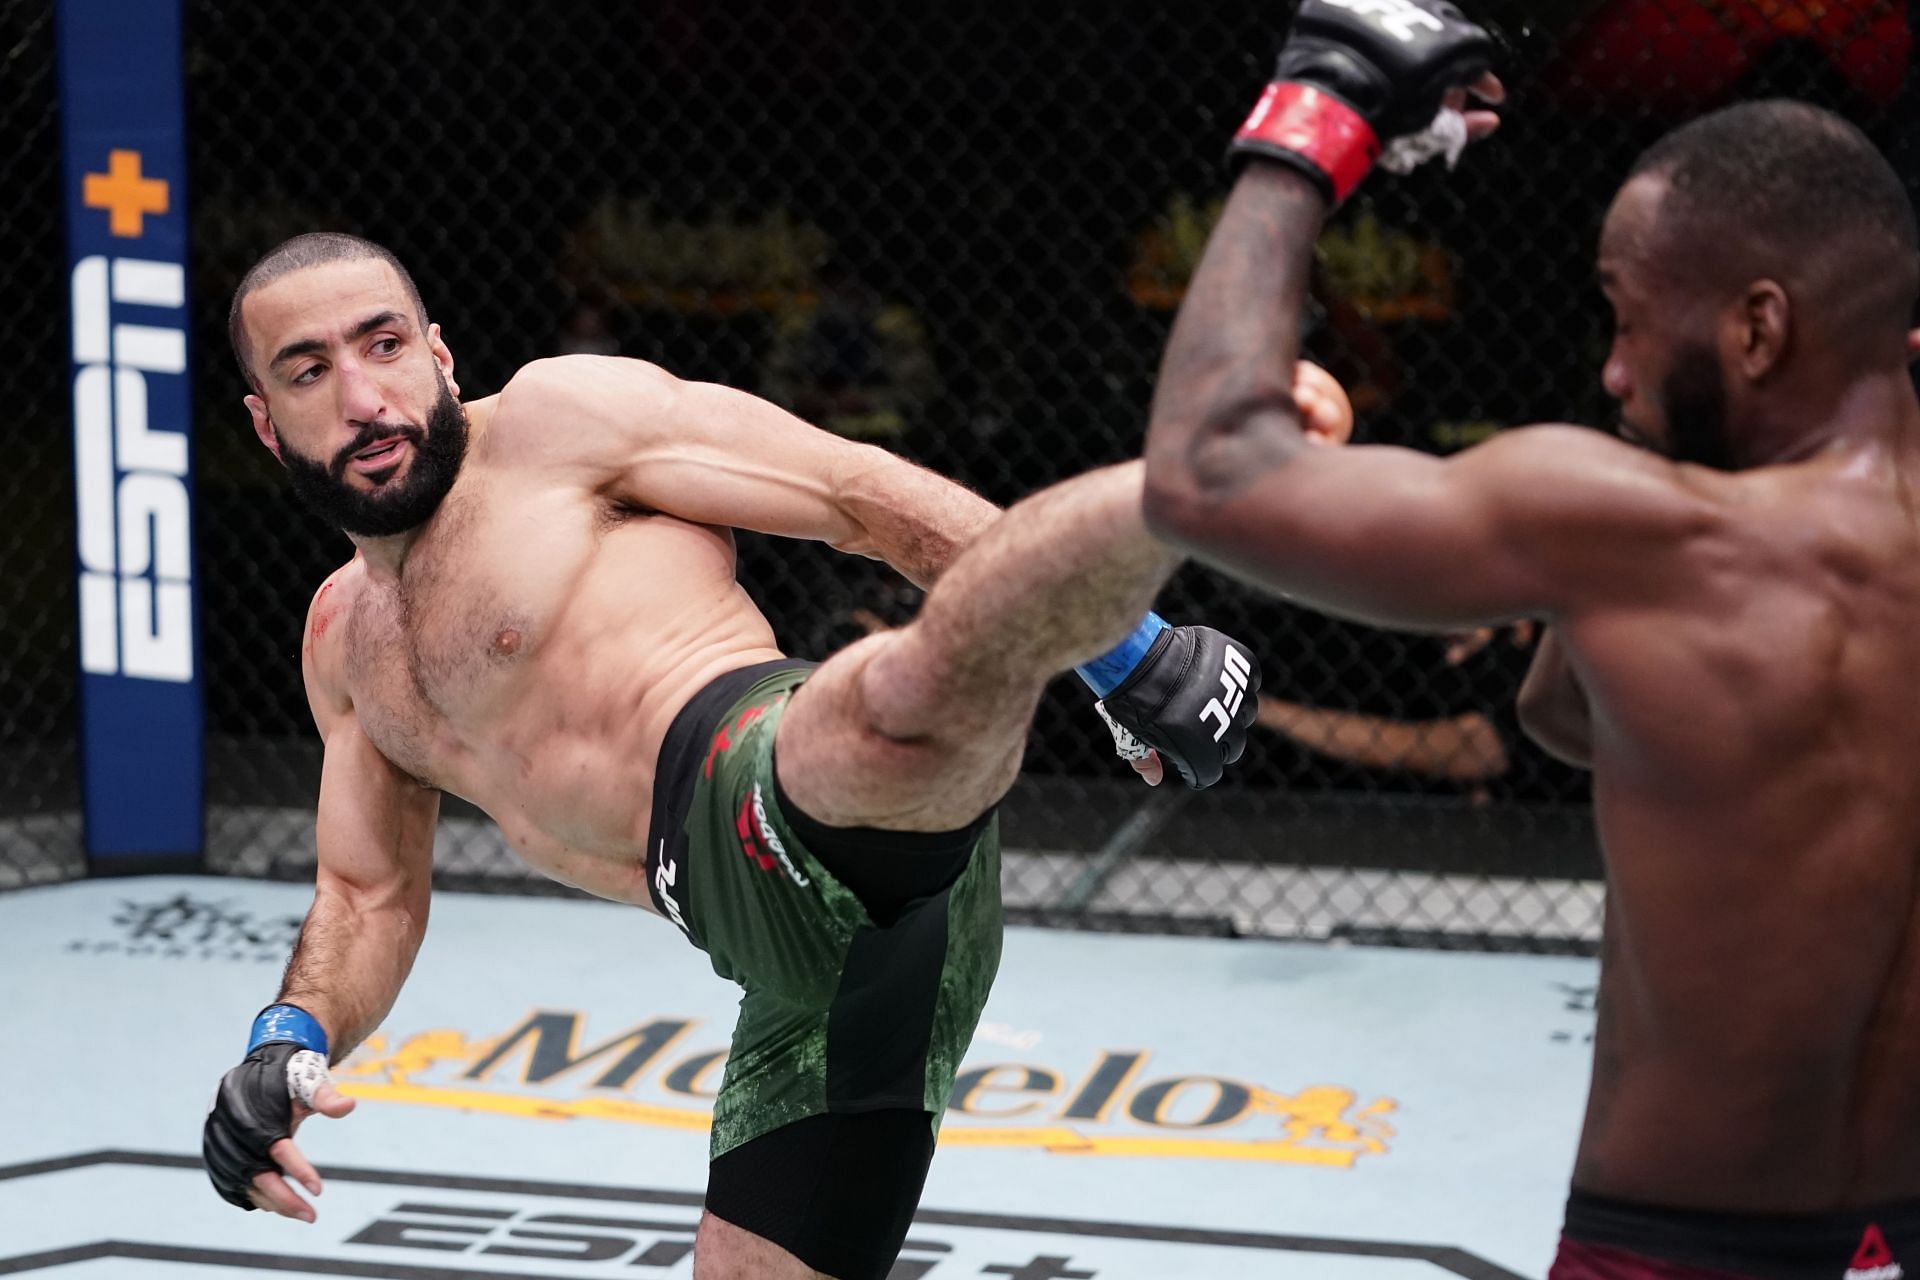 Belal Muhammad is an effective fighter, but not the most exciting one to watch